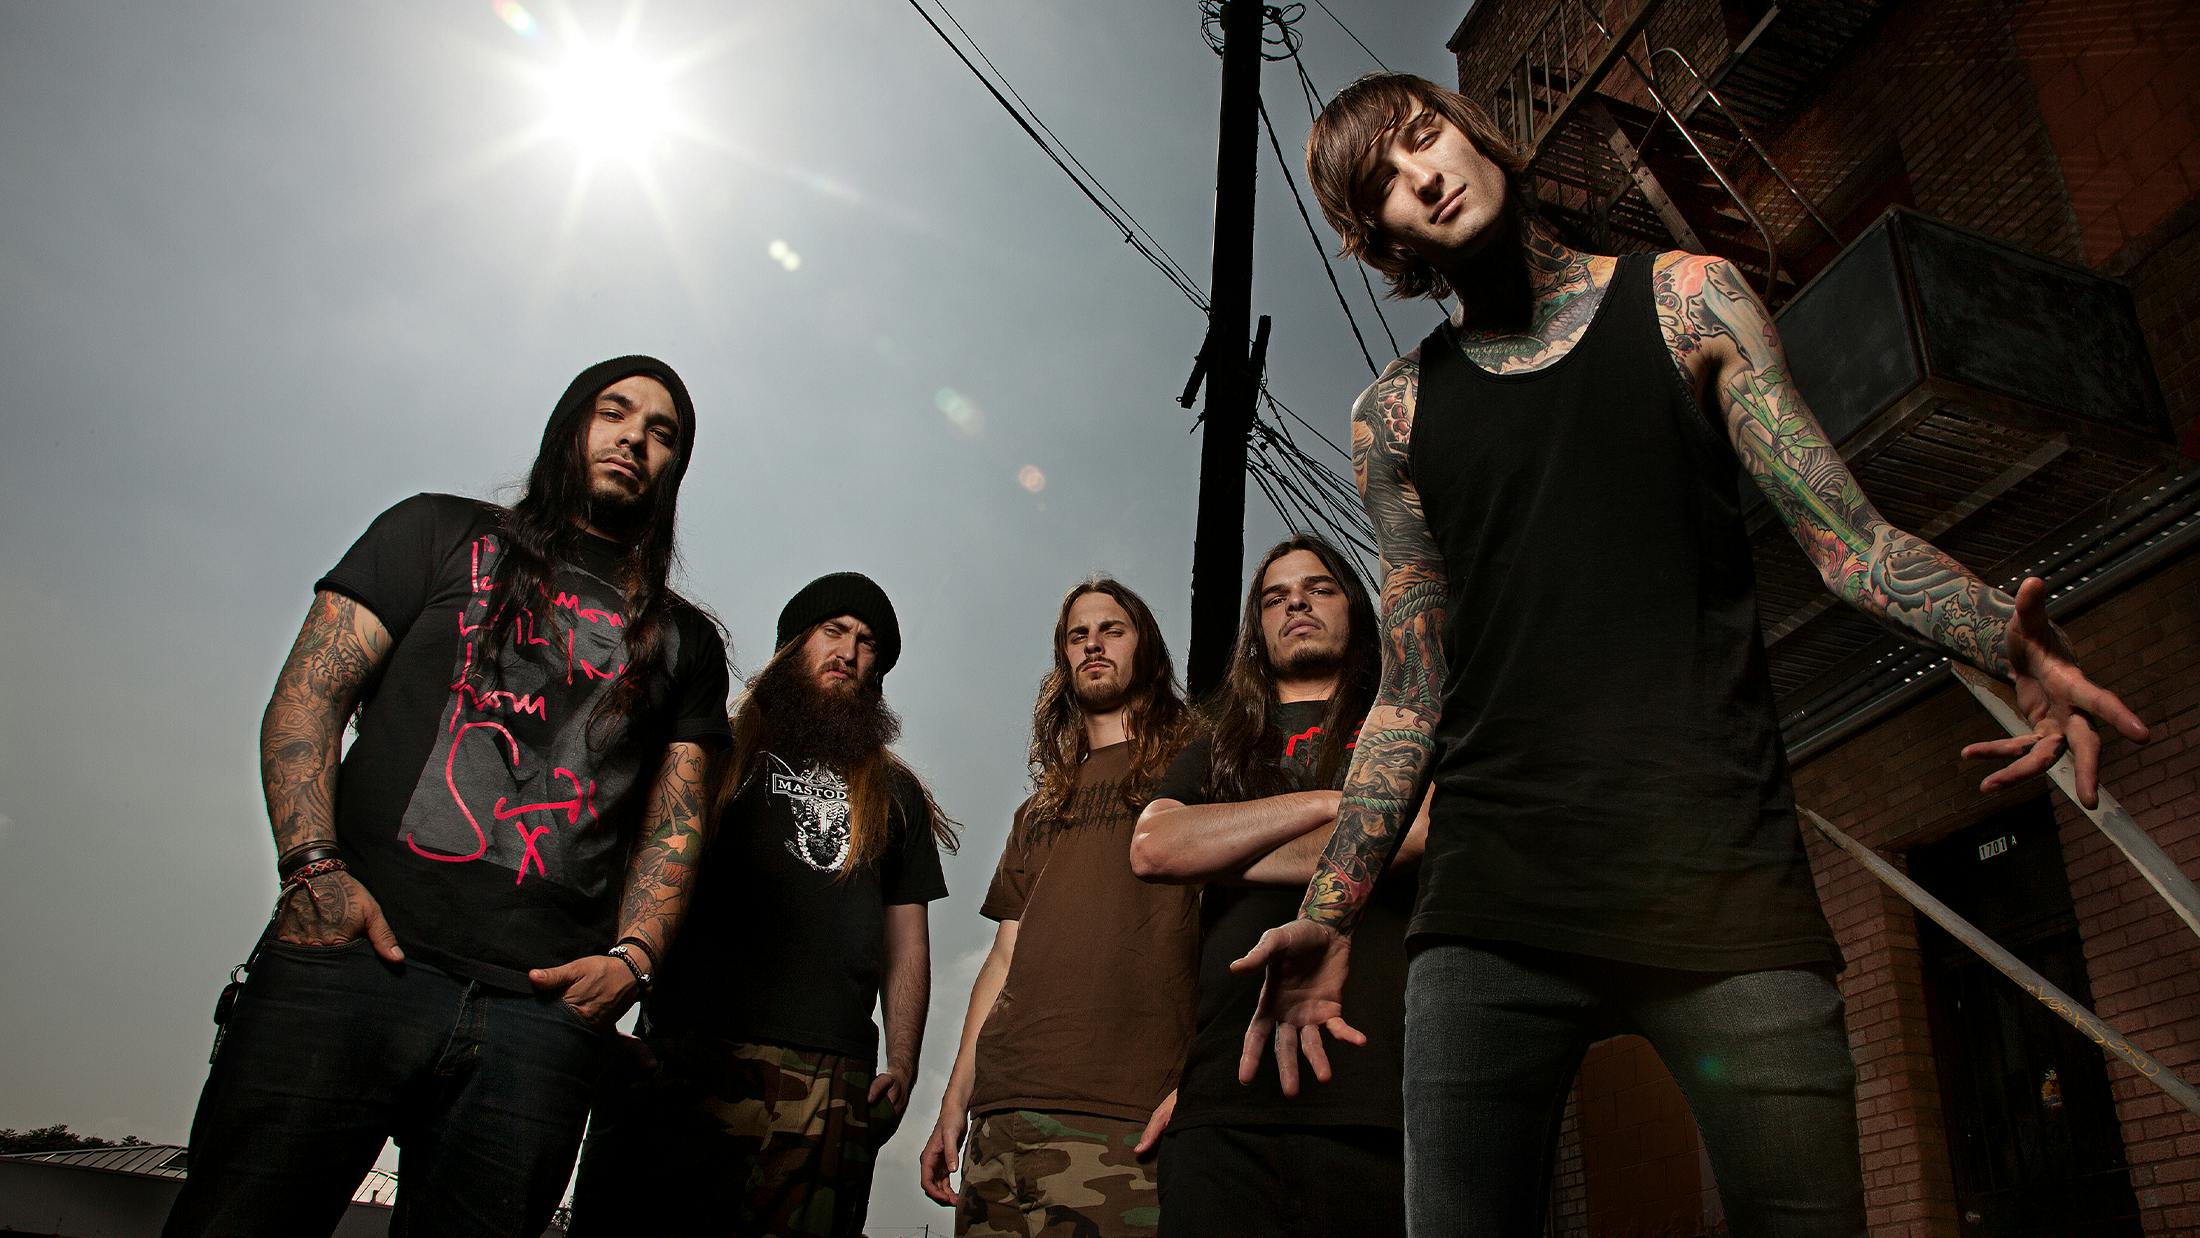 Remembering Mitch Lucker: A positive, dedicated metalhead with a big heart